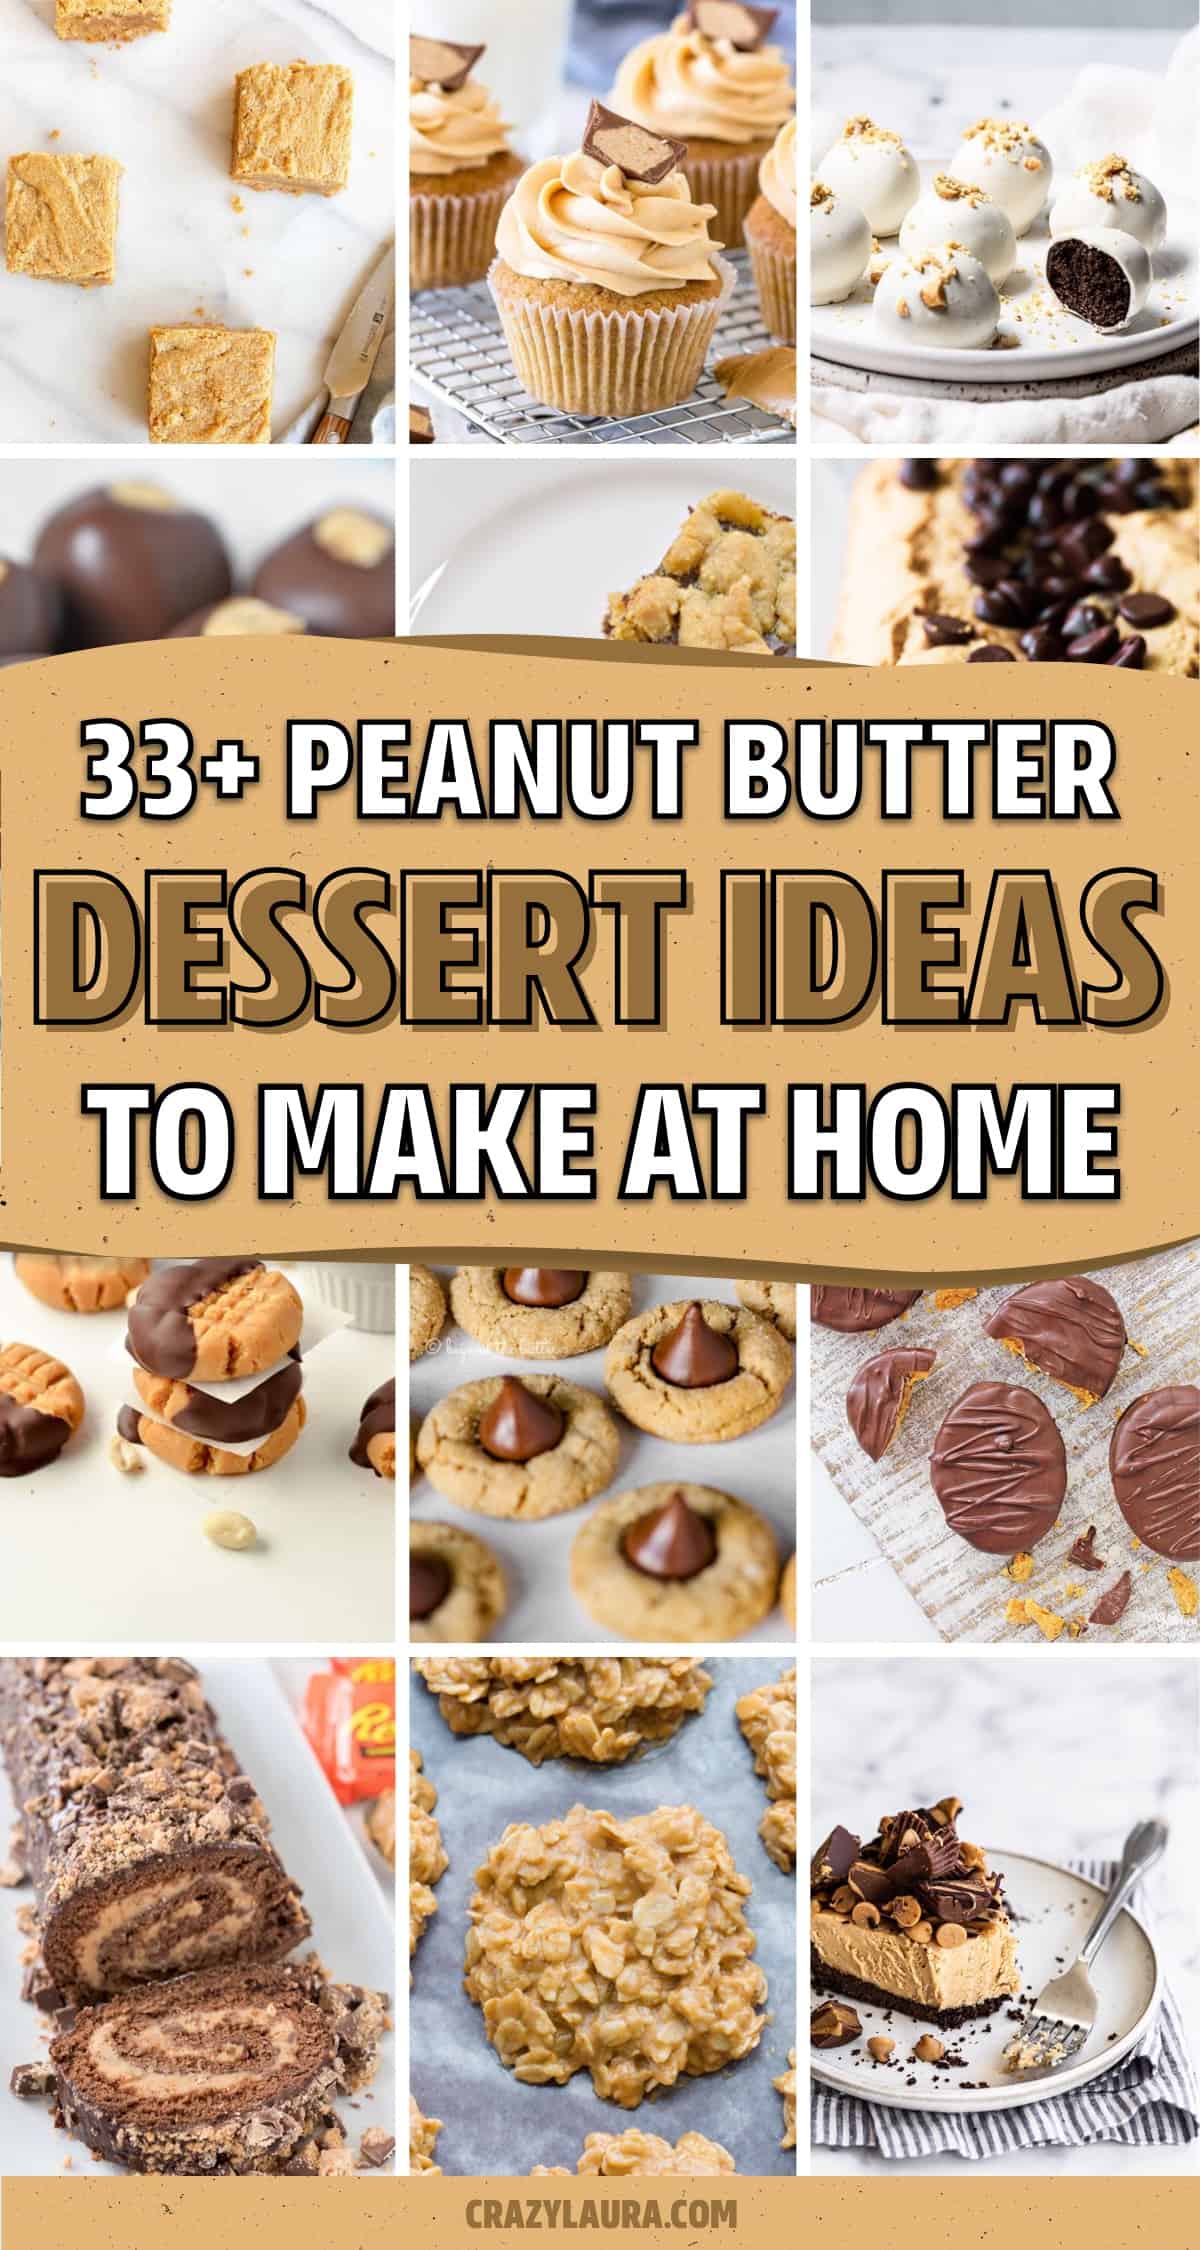 recipes top bake at home with peanut butter